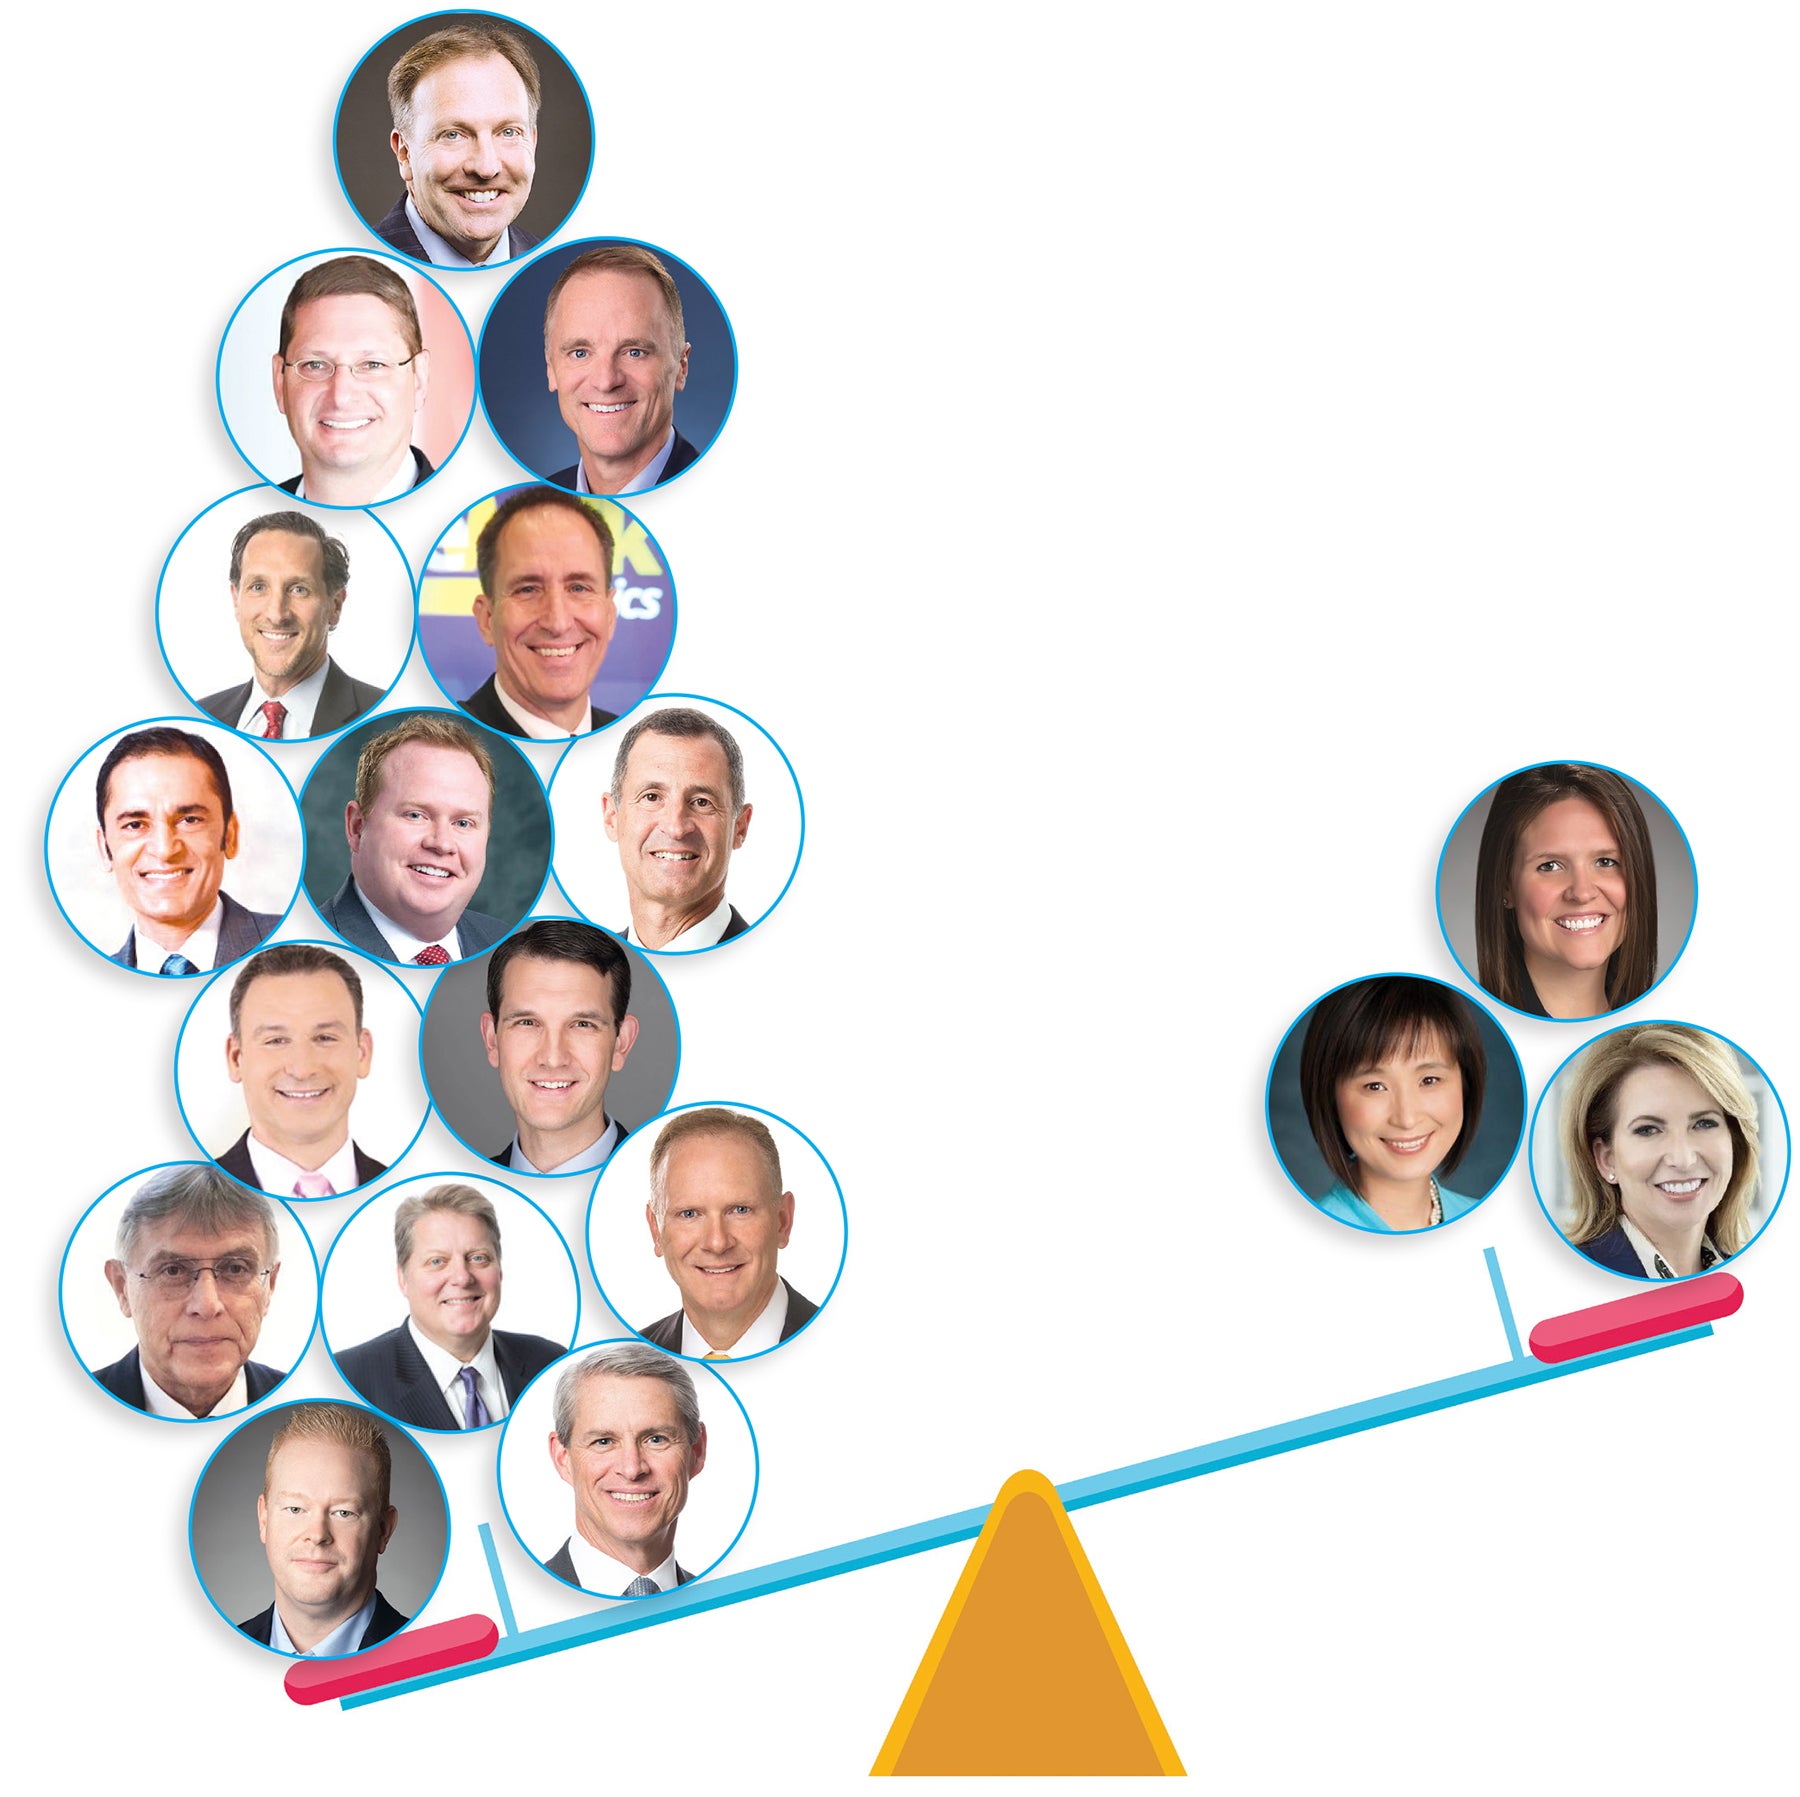 A graphic showing male and female CEO headshots on a see-saw